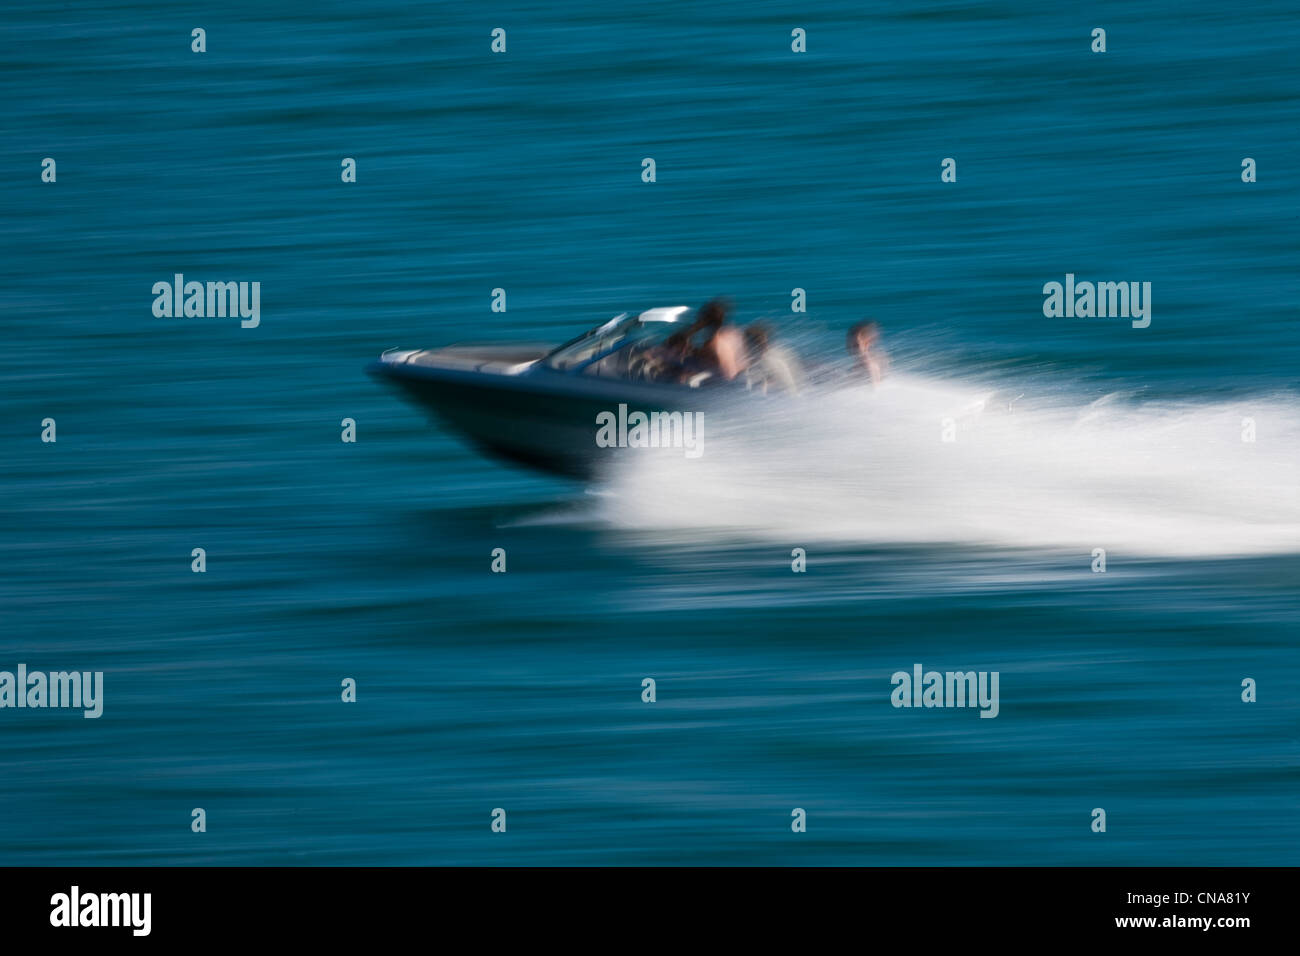 France, Haute Savoie, Lake Annecy, motorboat Stock Photo